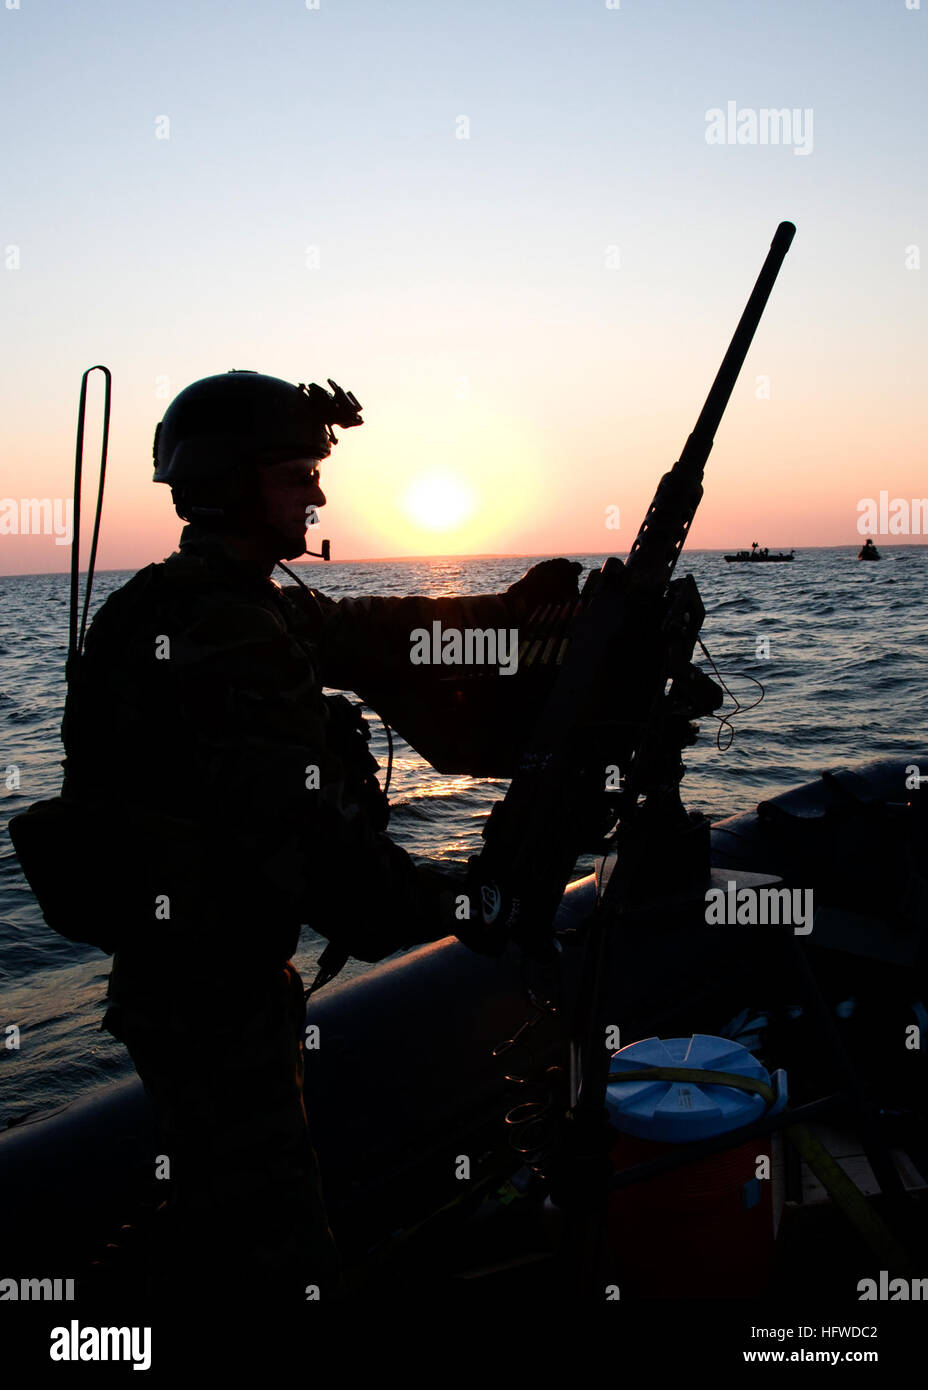 080903-N-4500G-416 PINEY ISLAND, N.C. (Sept. 3, 2008) A Special Warfare Combatant-craft Crewman (SWCC) from Special Boat Team 20 holds a .50-caliber machine gun steady in between live-fire drills on the Pamlico Sound. Several Naval Special Warfare 11-meter rigid-hull inflatable boat detachments participated in the training, which included training on grenade launchers and .50-caliber machine guns preparing for an upcoming deployment supporting the Global War on Terror. (U.S. Navy photo by Mass Communication Specialist 3rd Class Robyn Gerstenslager/Released) US Navy 080903-N-4500G-416 A Special Stock Photo